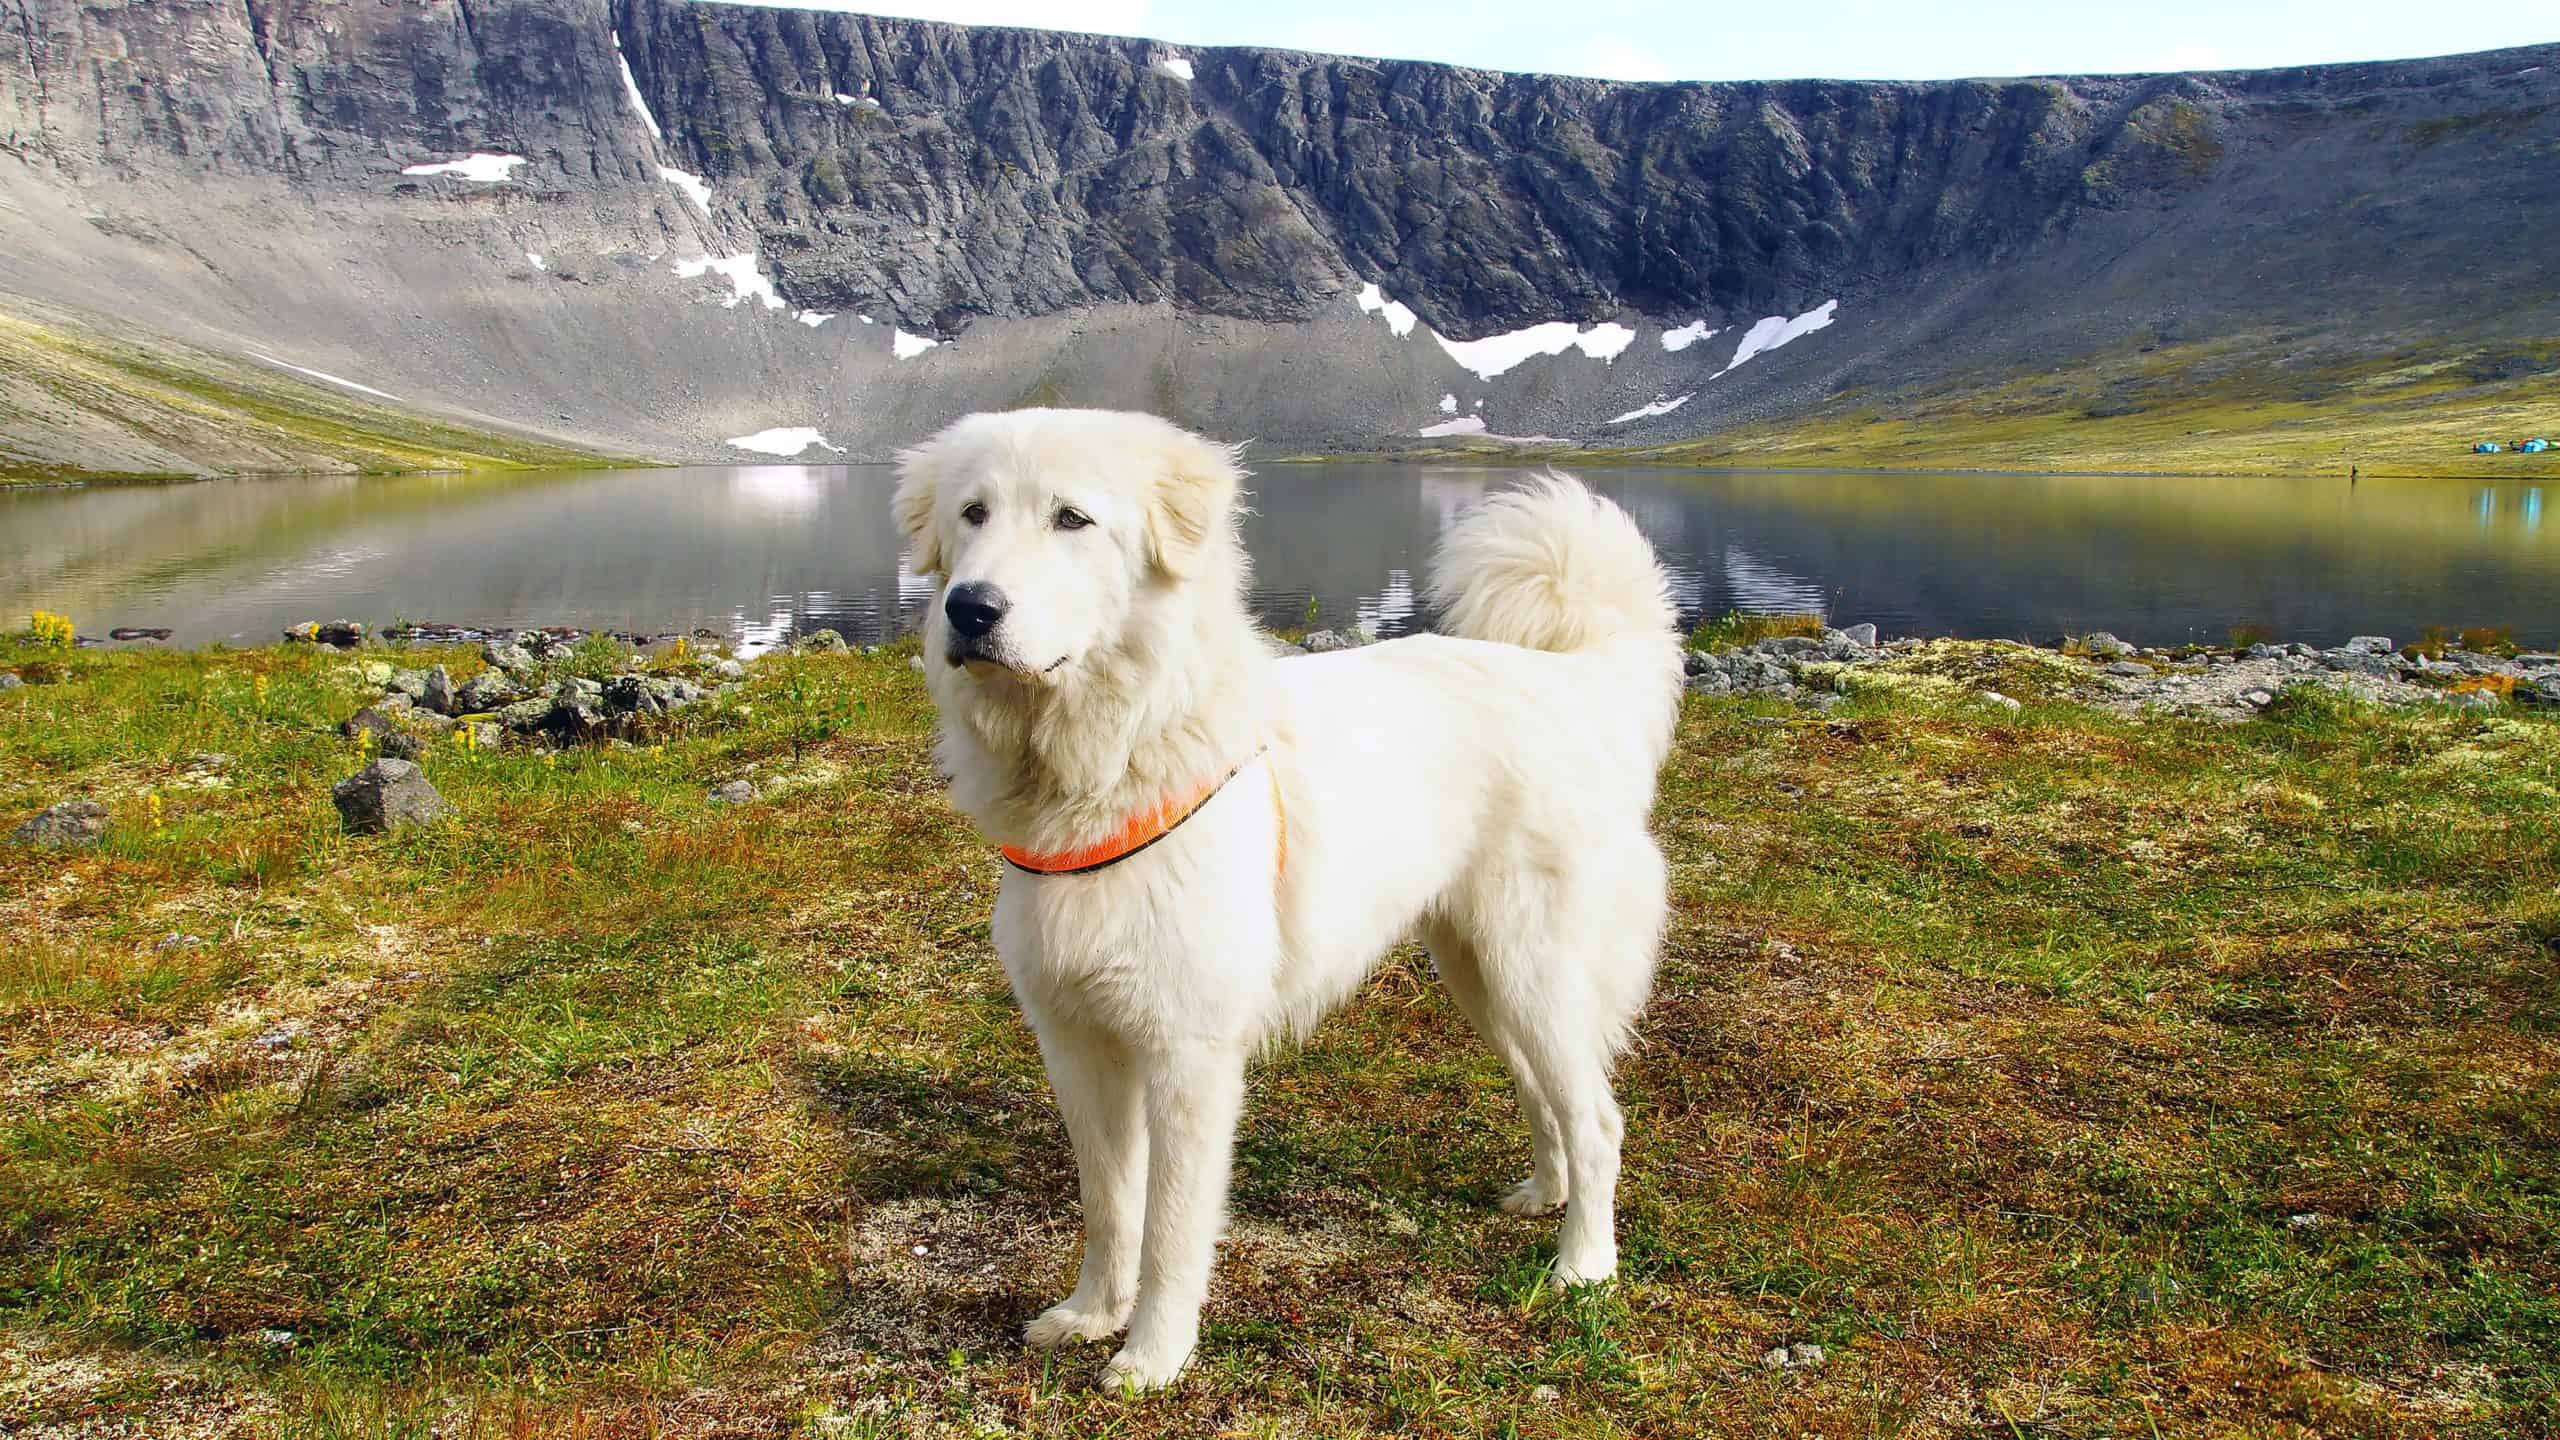 Anatolian Shepherd stands on mountain hillside. The Anatolian Shepherd is a livestock guardian. That means the dog will protect you, your home, and everyone living it in.